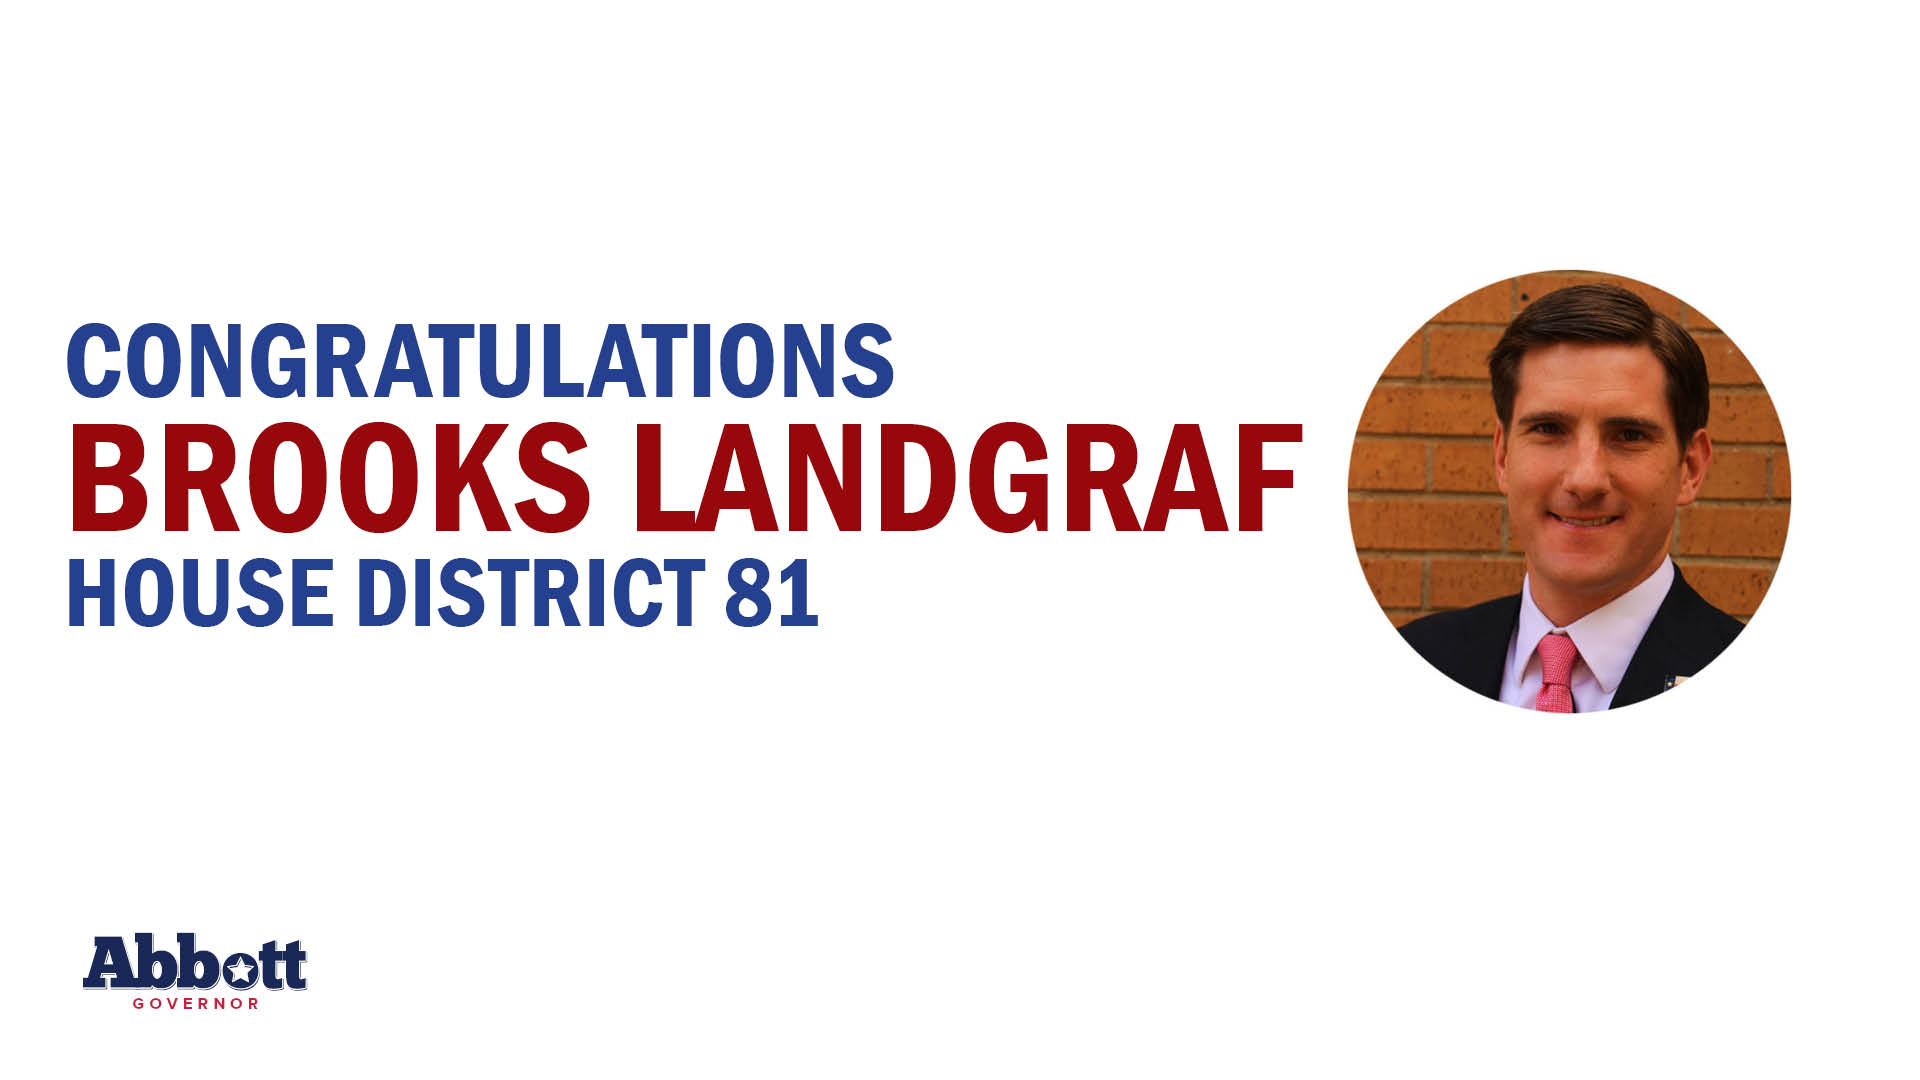 Governor Abbott Issues Statement On Representative Landgraf’s Re-Election In West Texas ​​​​​​